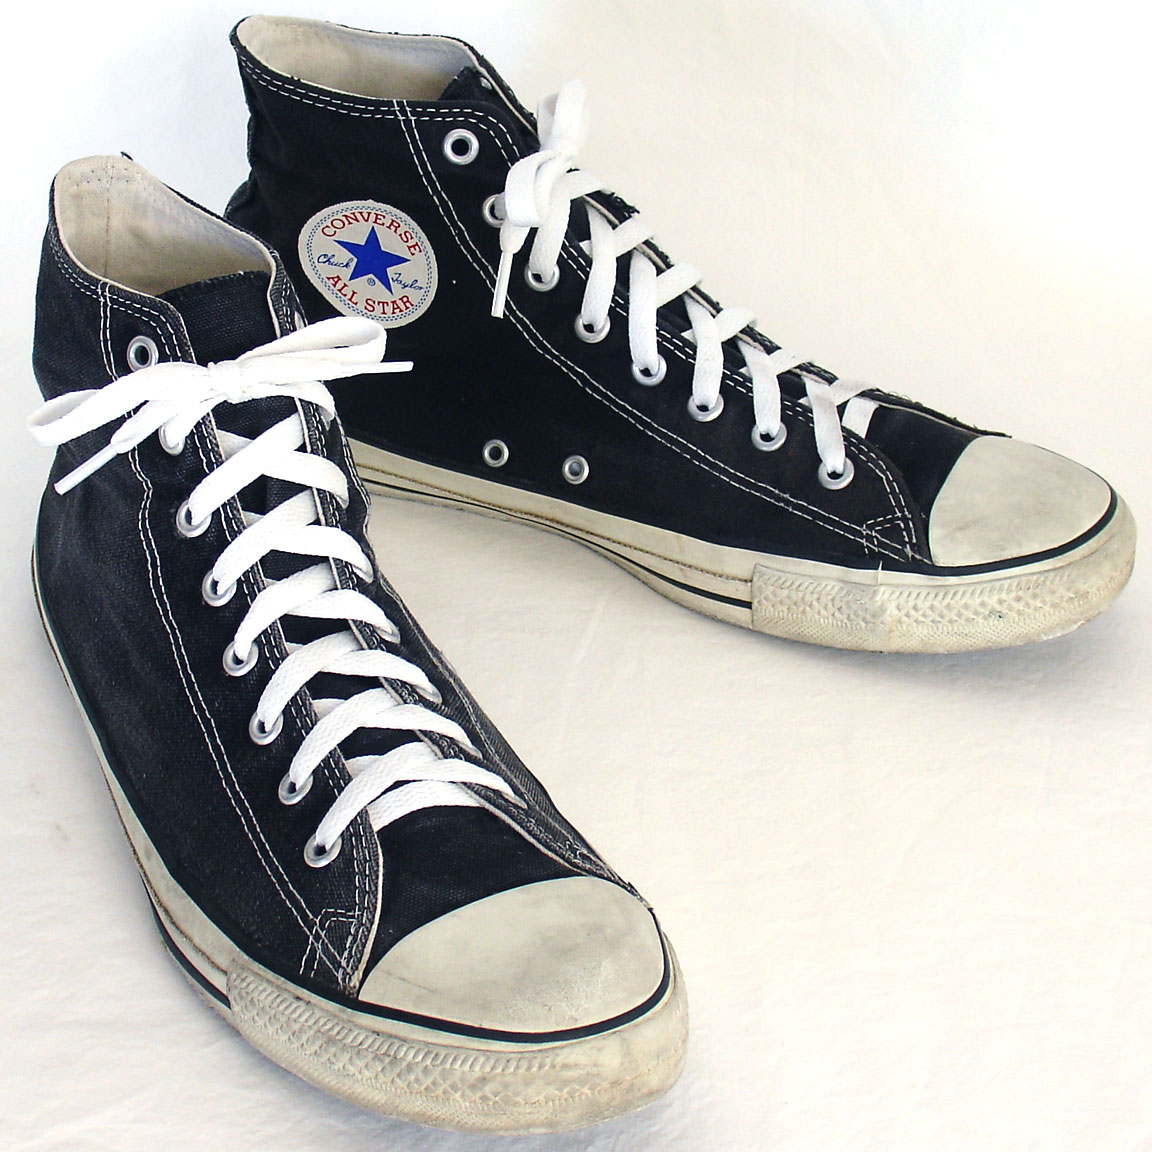 Vintage American-made Converse All Star Chuck Taylor black hi-top shoes for sale at http://www.collectornet.net/shoes